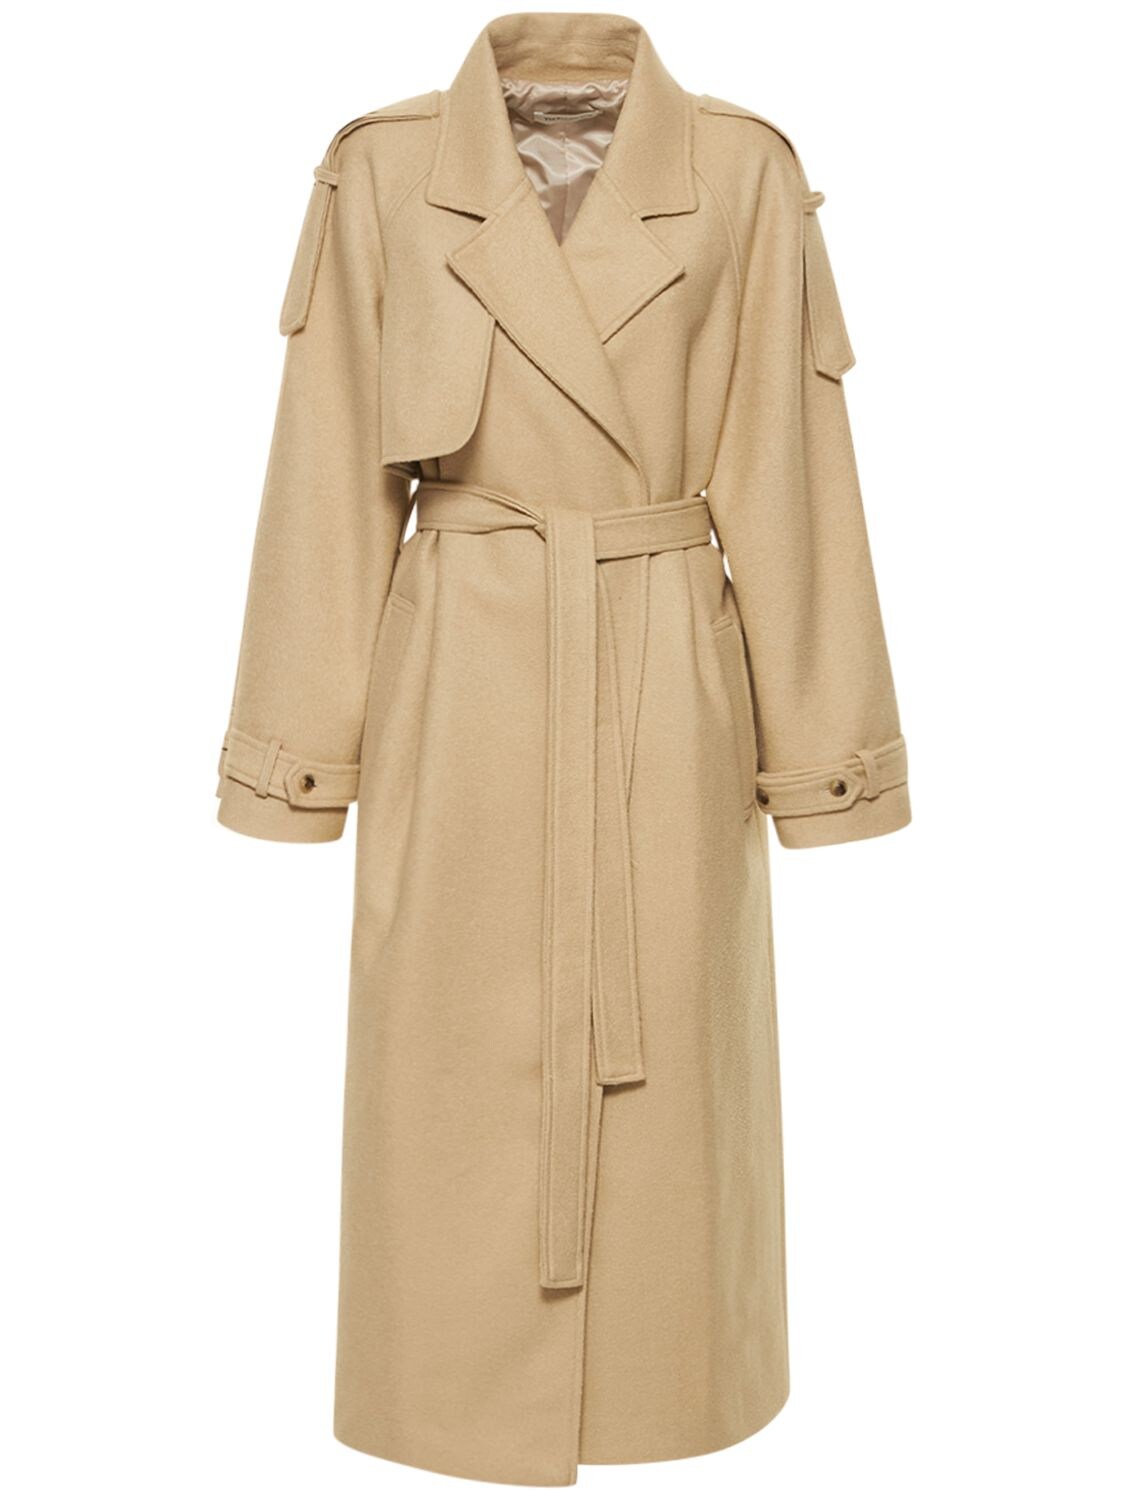 THE FRANKIE SHOP SUZANNE BOILED WOOL TRENCH COAT